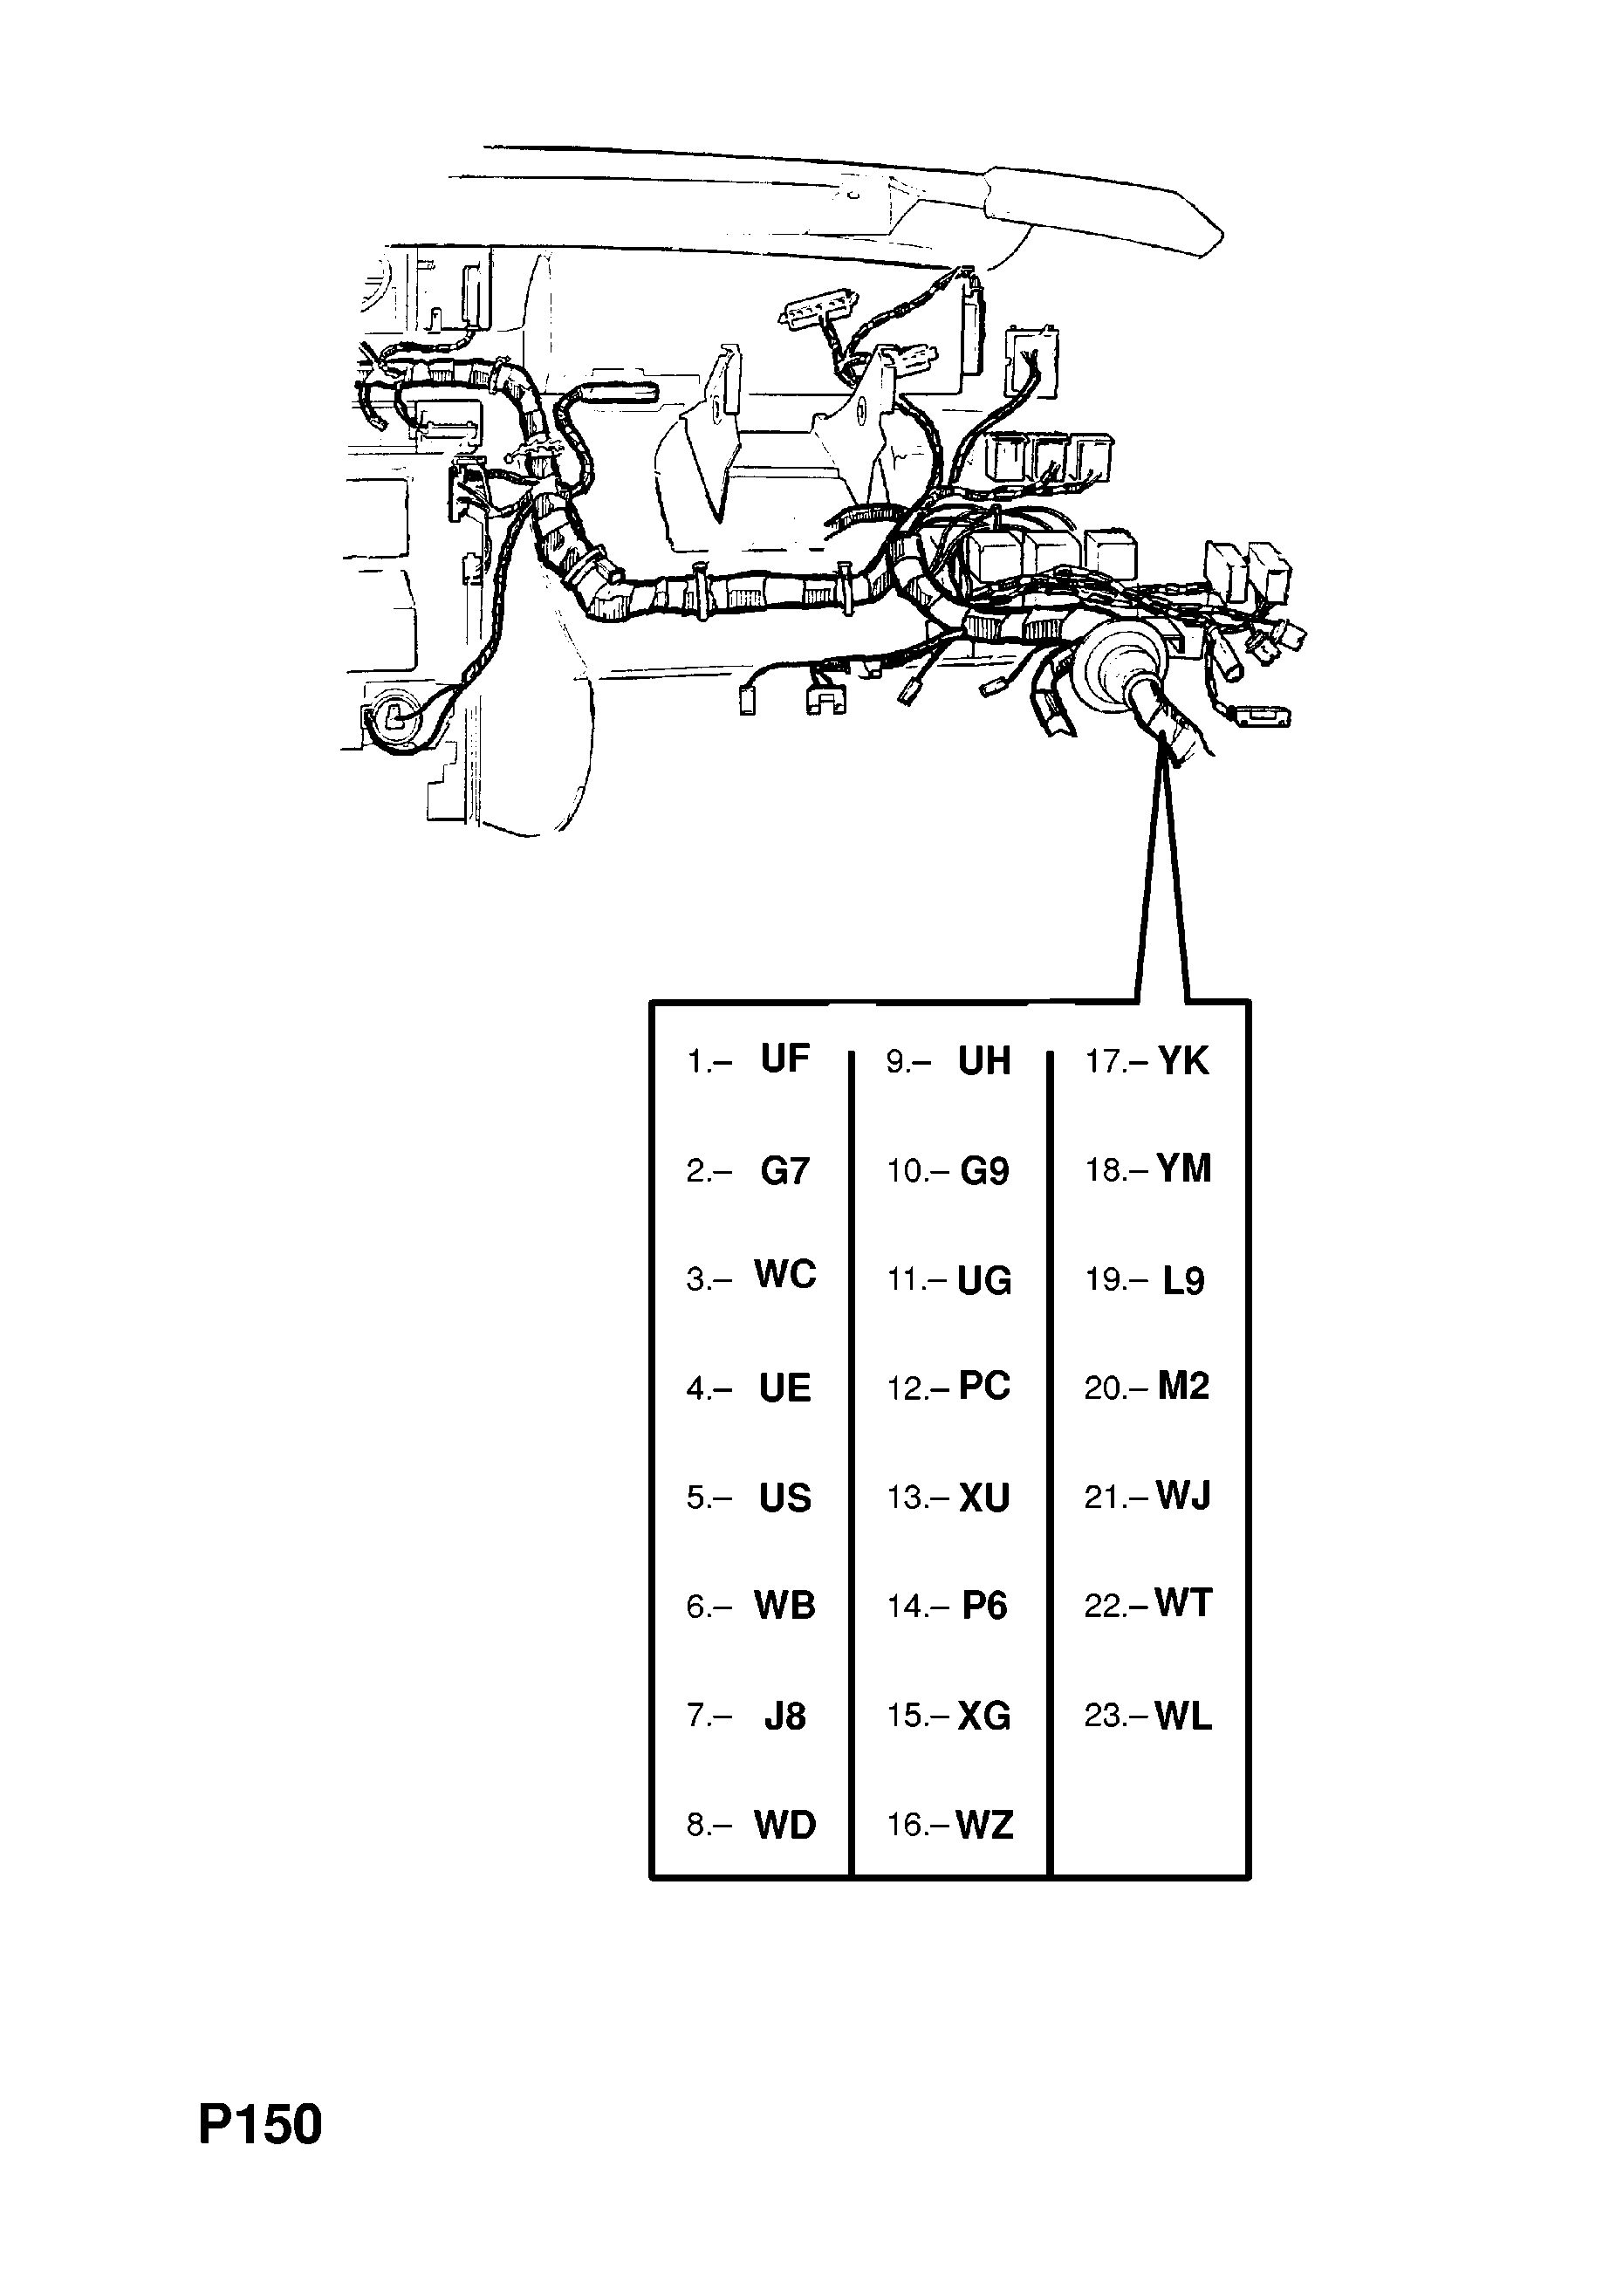 INSTRUMENT PANEL WIRING HARNESS (CONTD.) <small><i>[M1000001- FOR AIR CONDITIONING, MANUAL TRANSMISSION EXCEPT LCD INSTRUMENTS]</i></small>